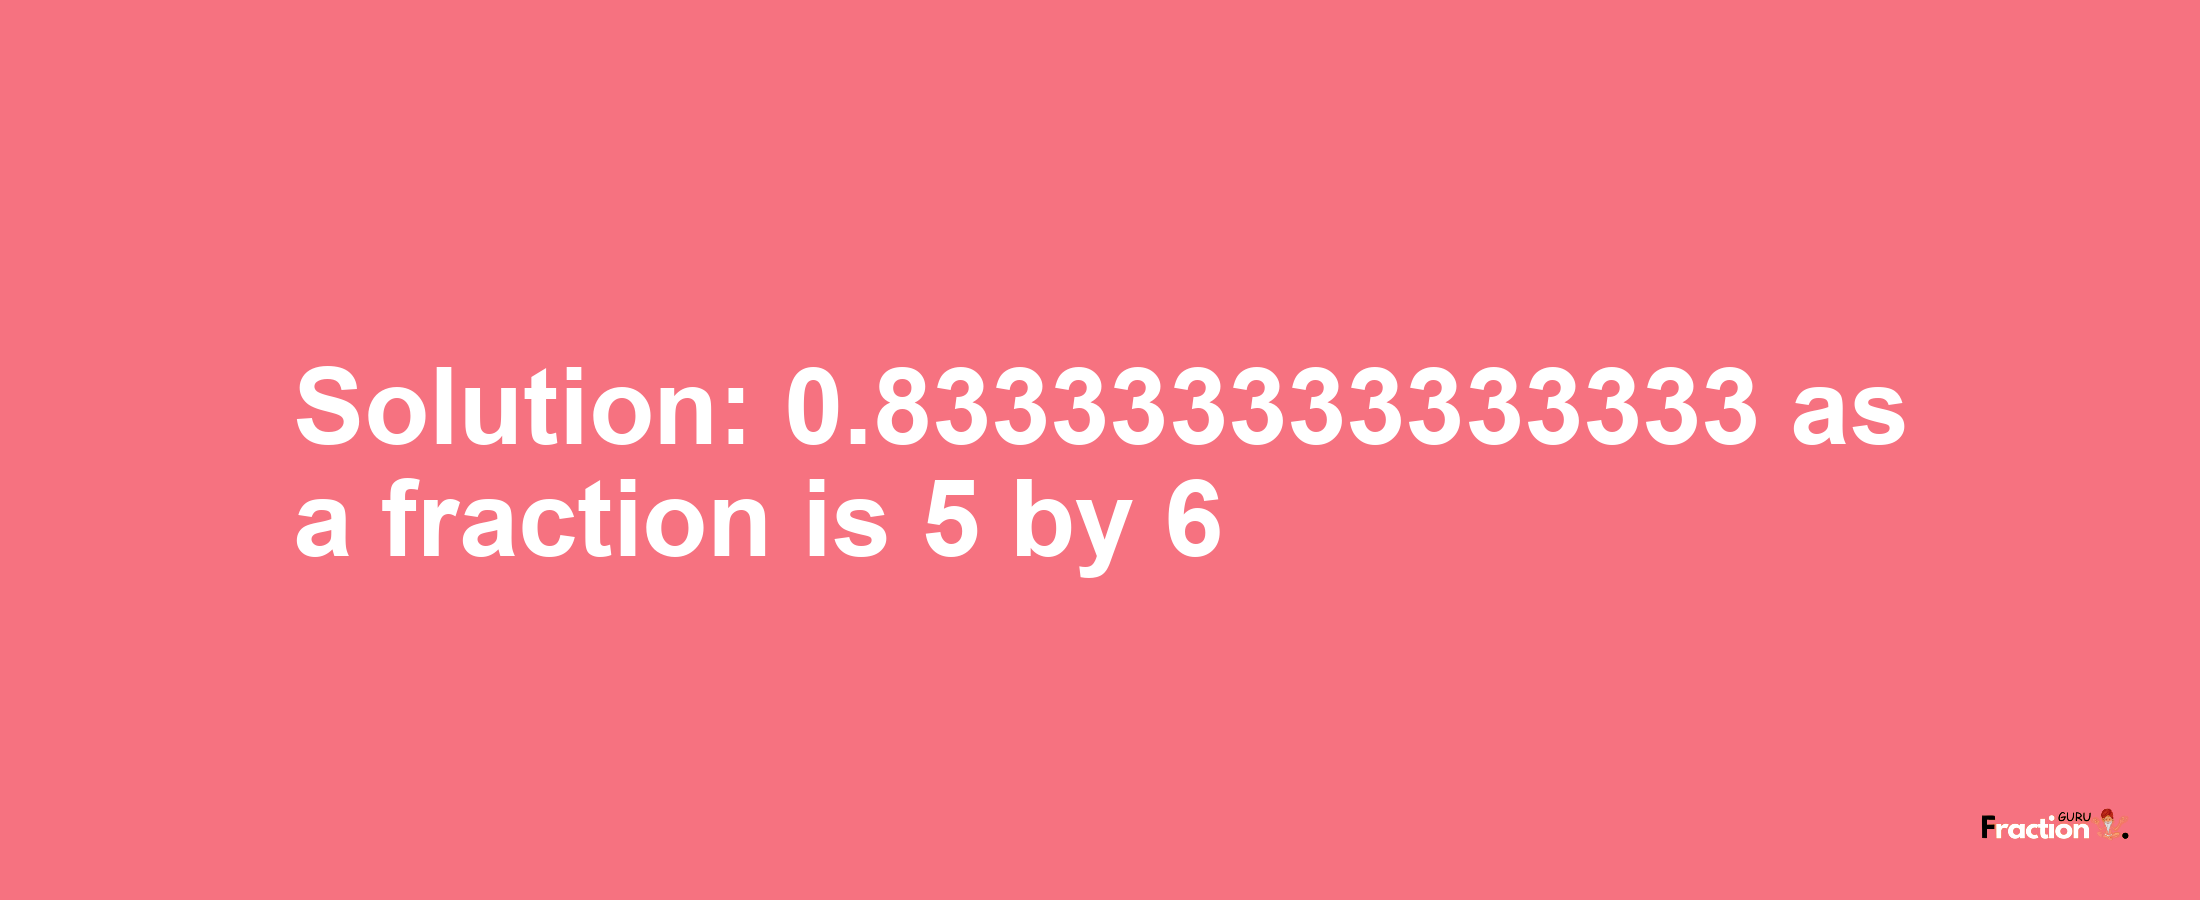 Solution:0.833333333333333 as a fraction is 5/6